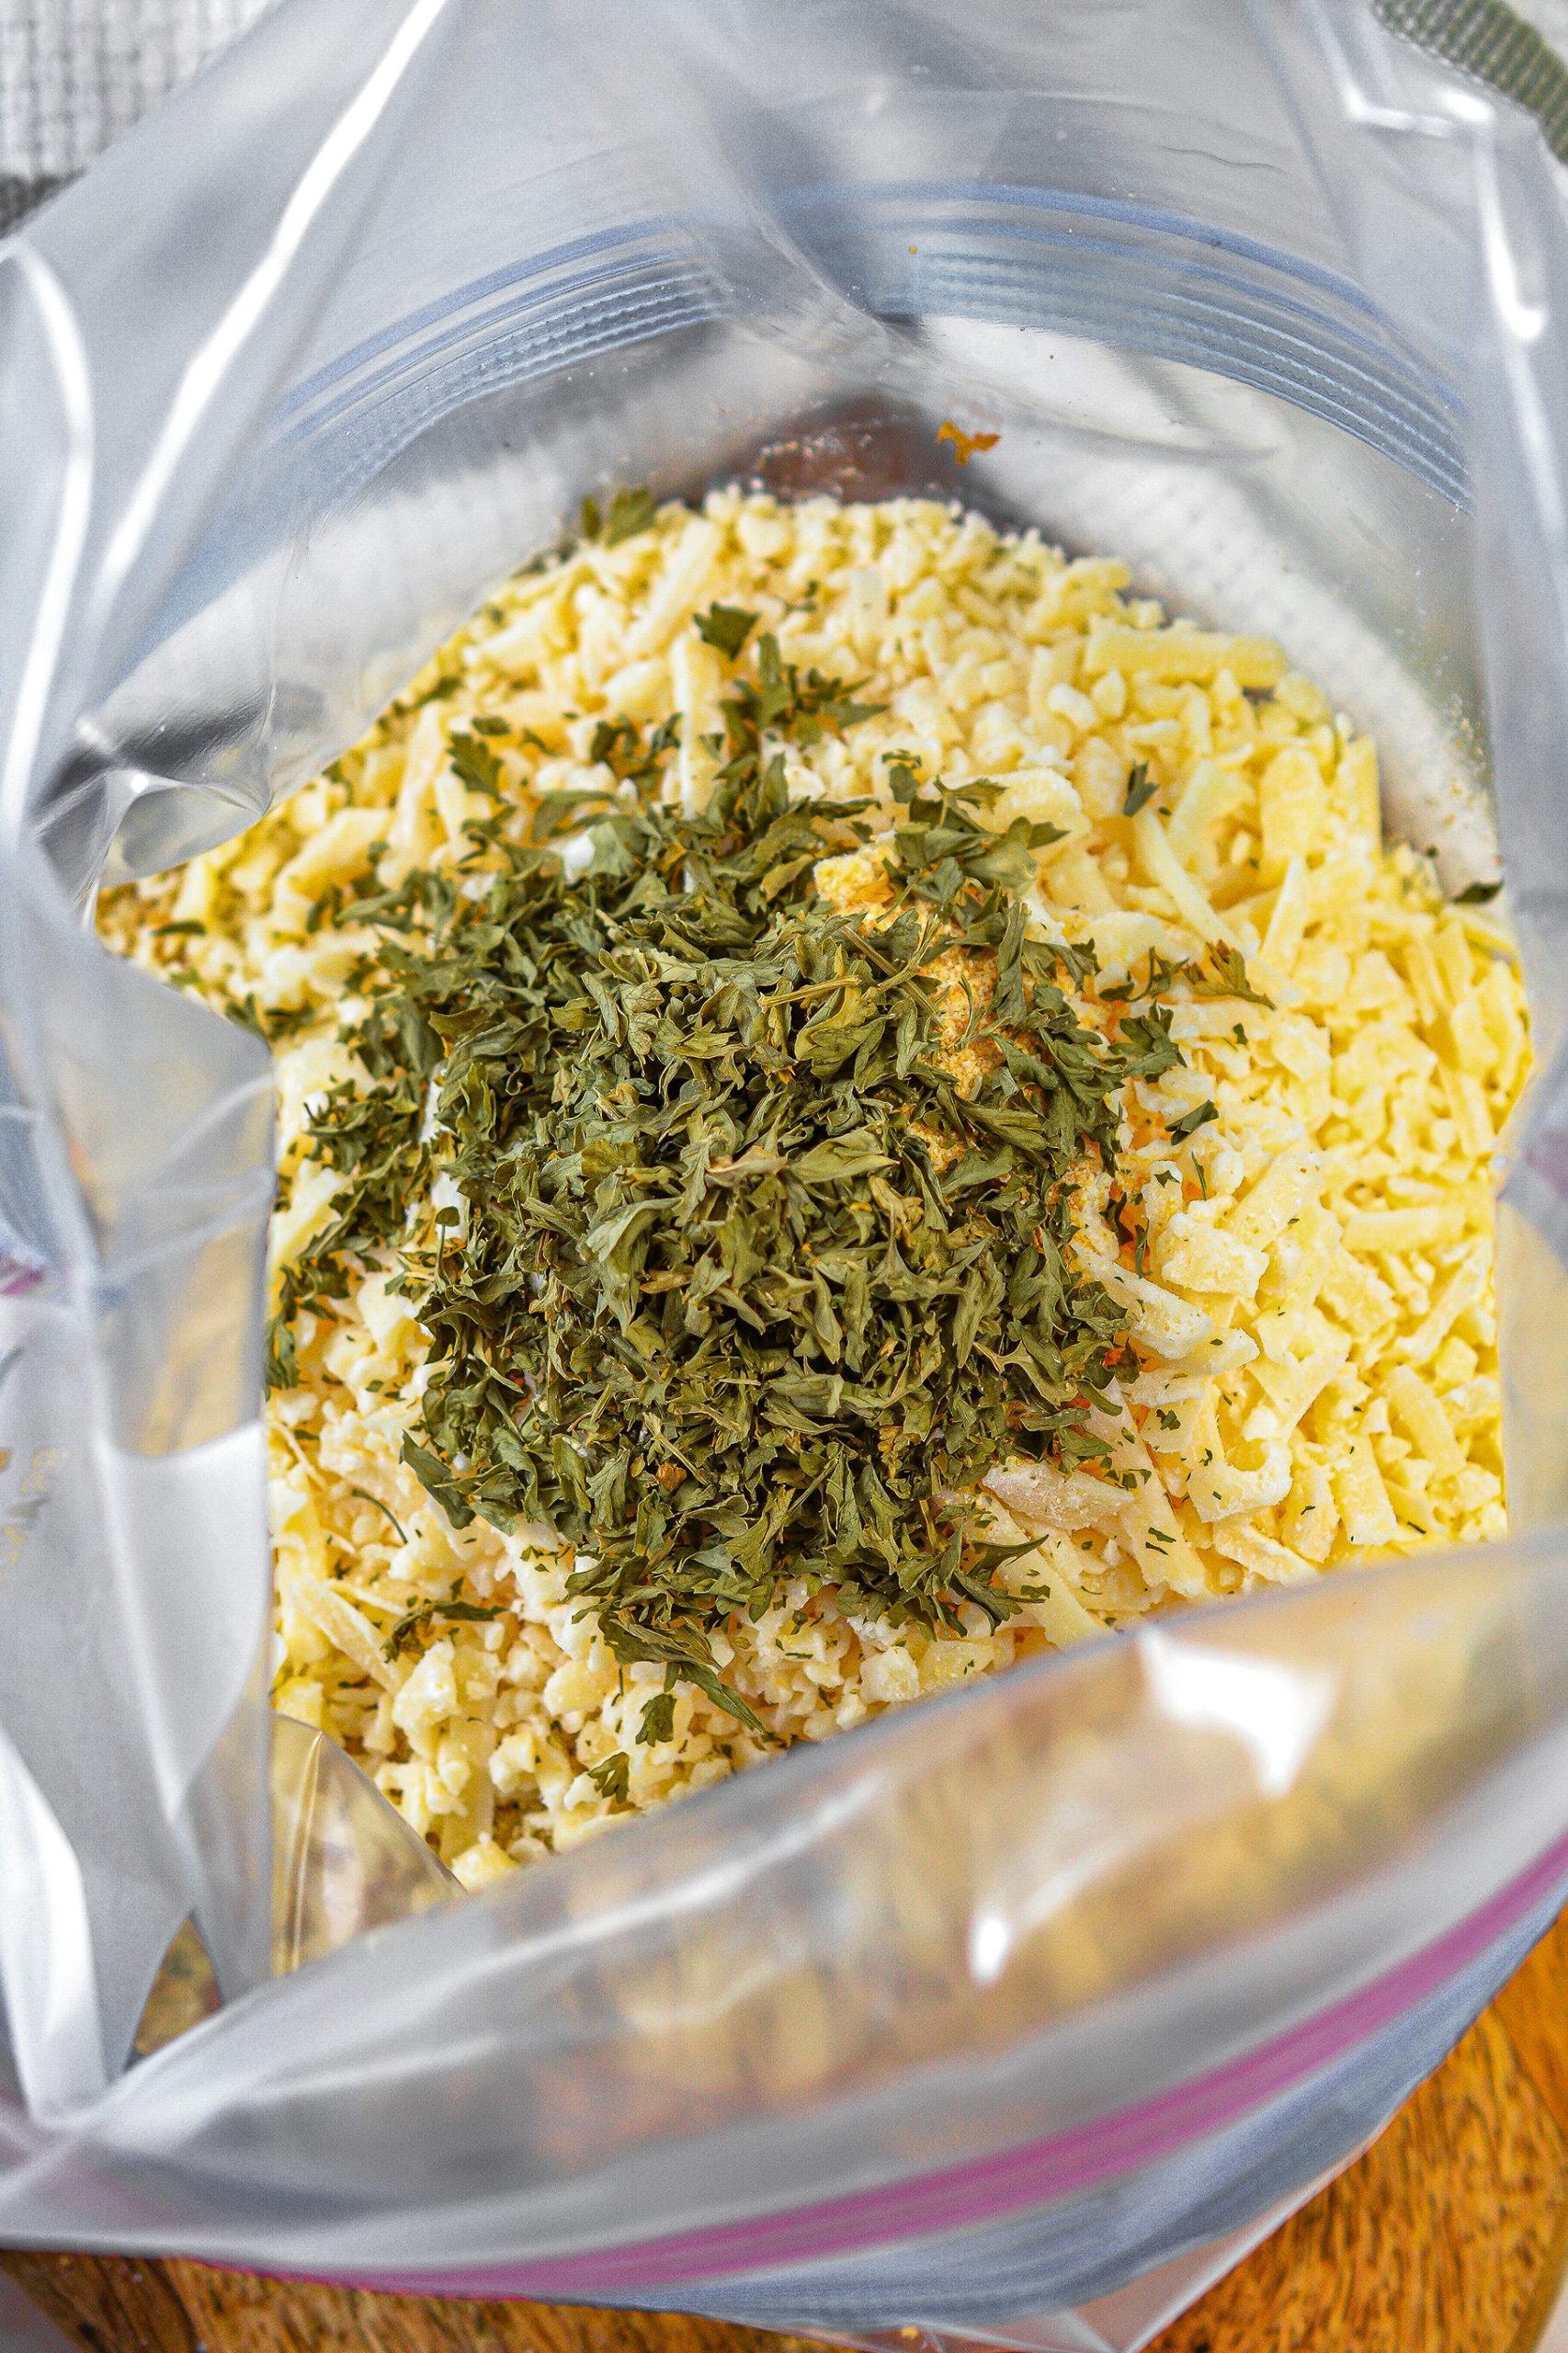 Add the breadcrumbs, parmesan cheese, garlic powder and parsley flakes to a Ziploc bag, close it and shake well.